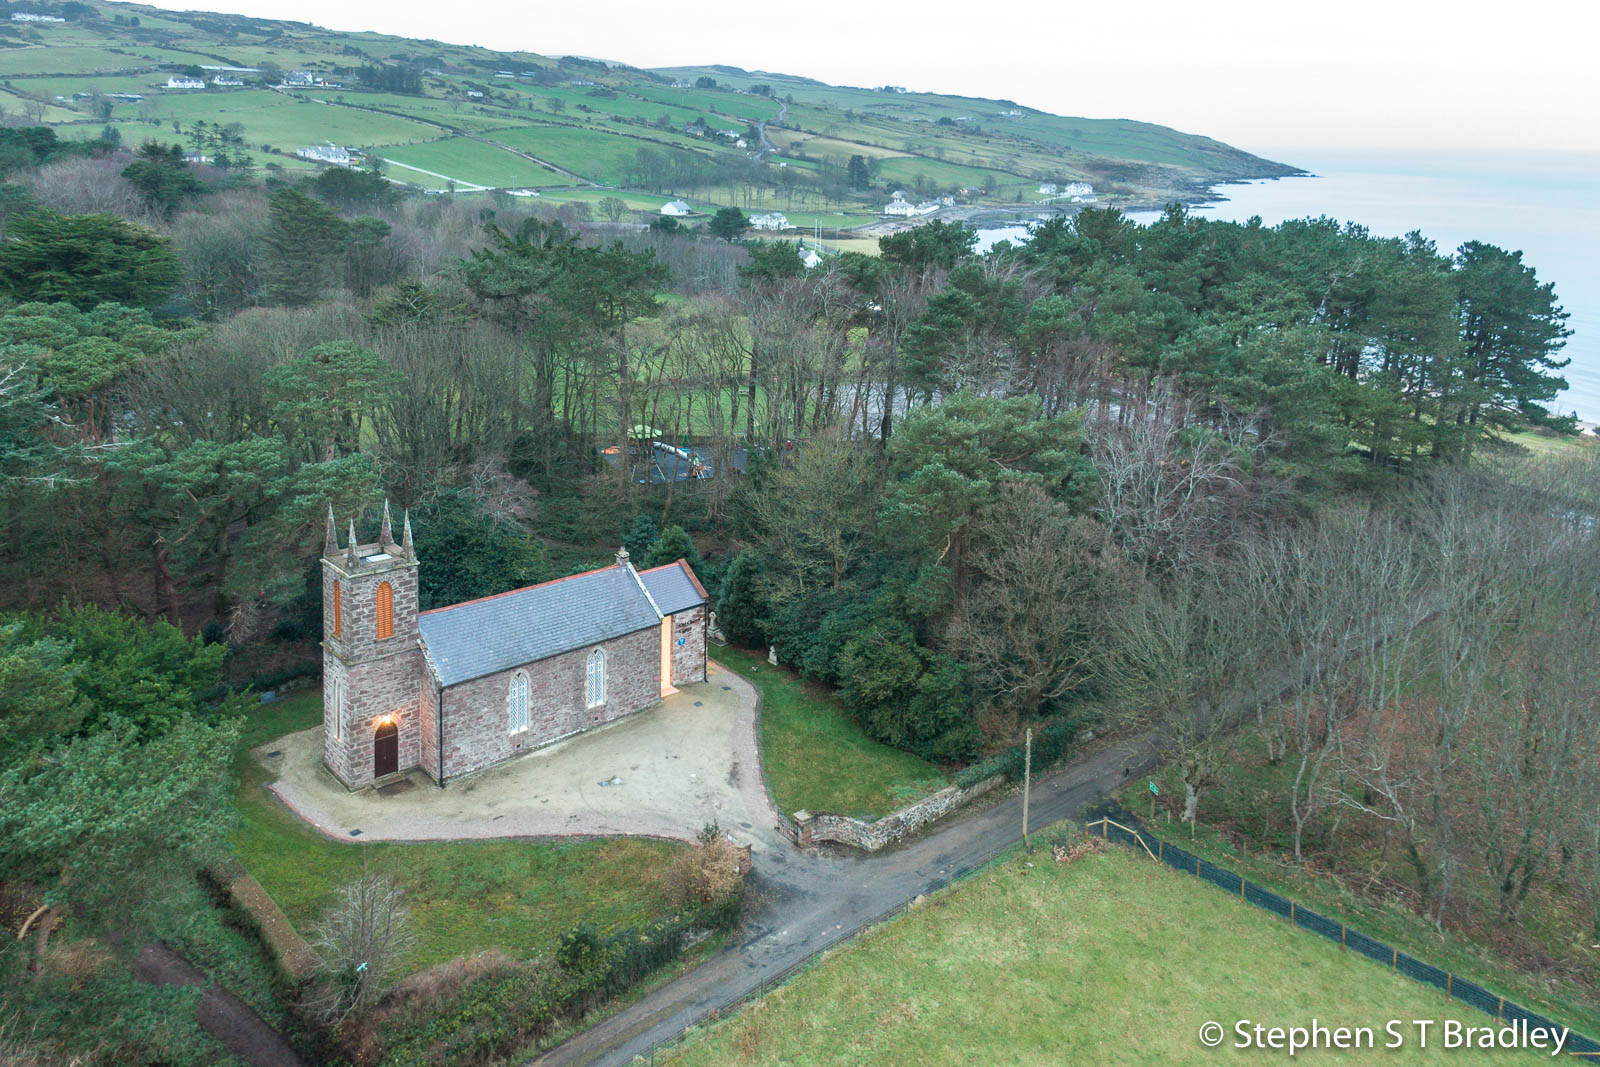 Aerial drone photography and video production services Dublin and Ireland portfolio - The Old Church Centre, Cushendun, aerial photo 0008